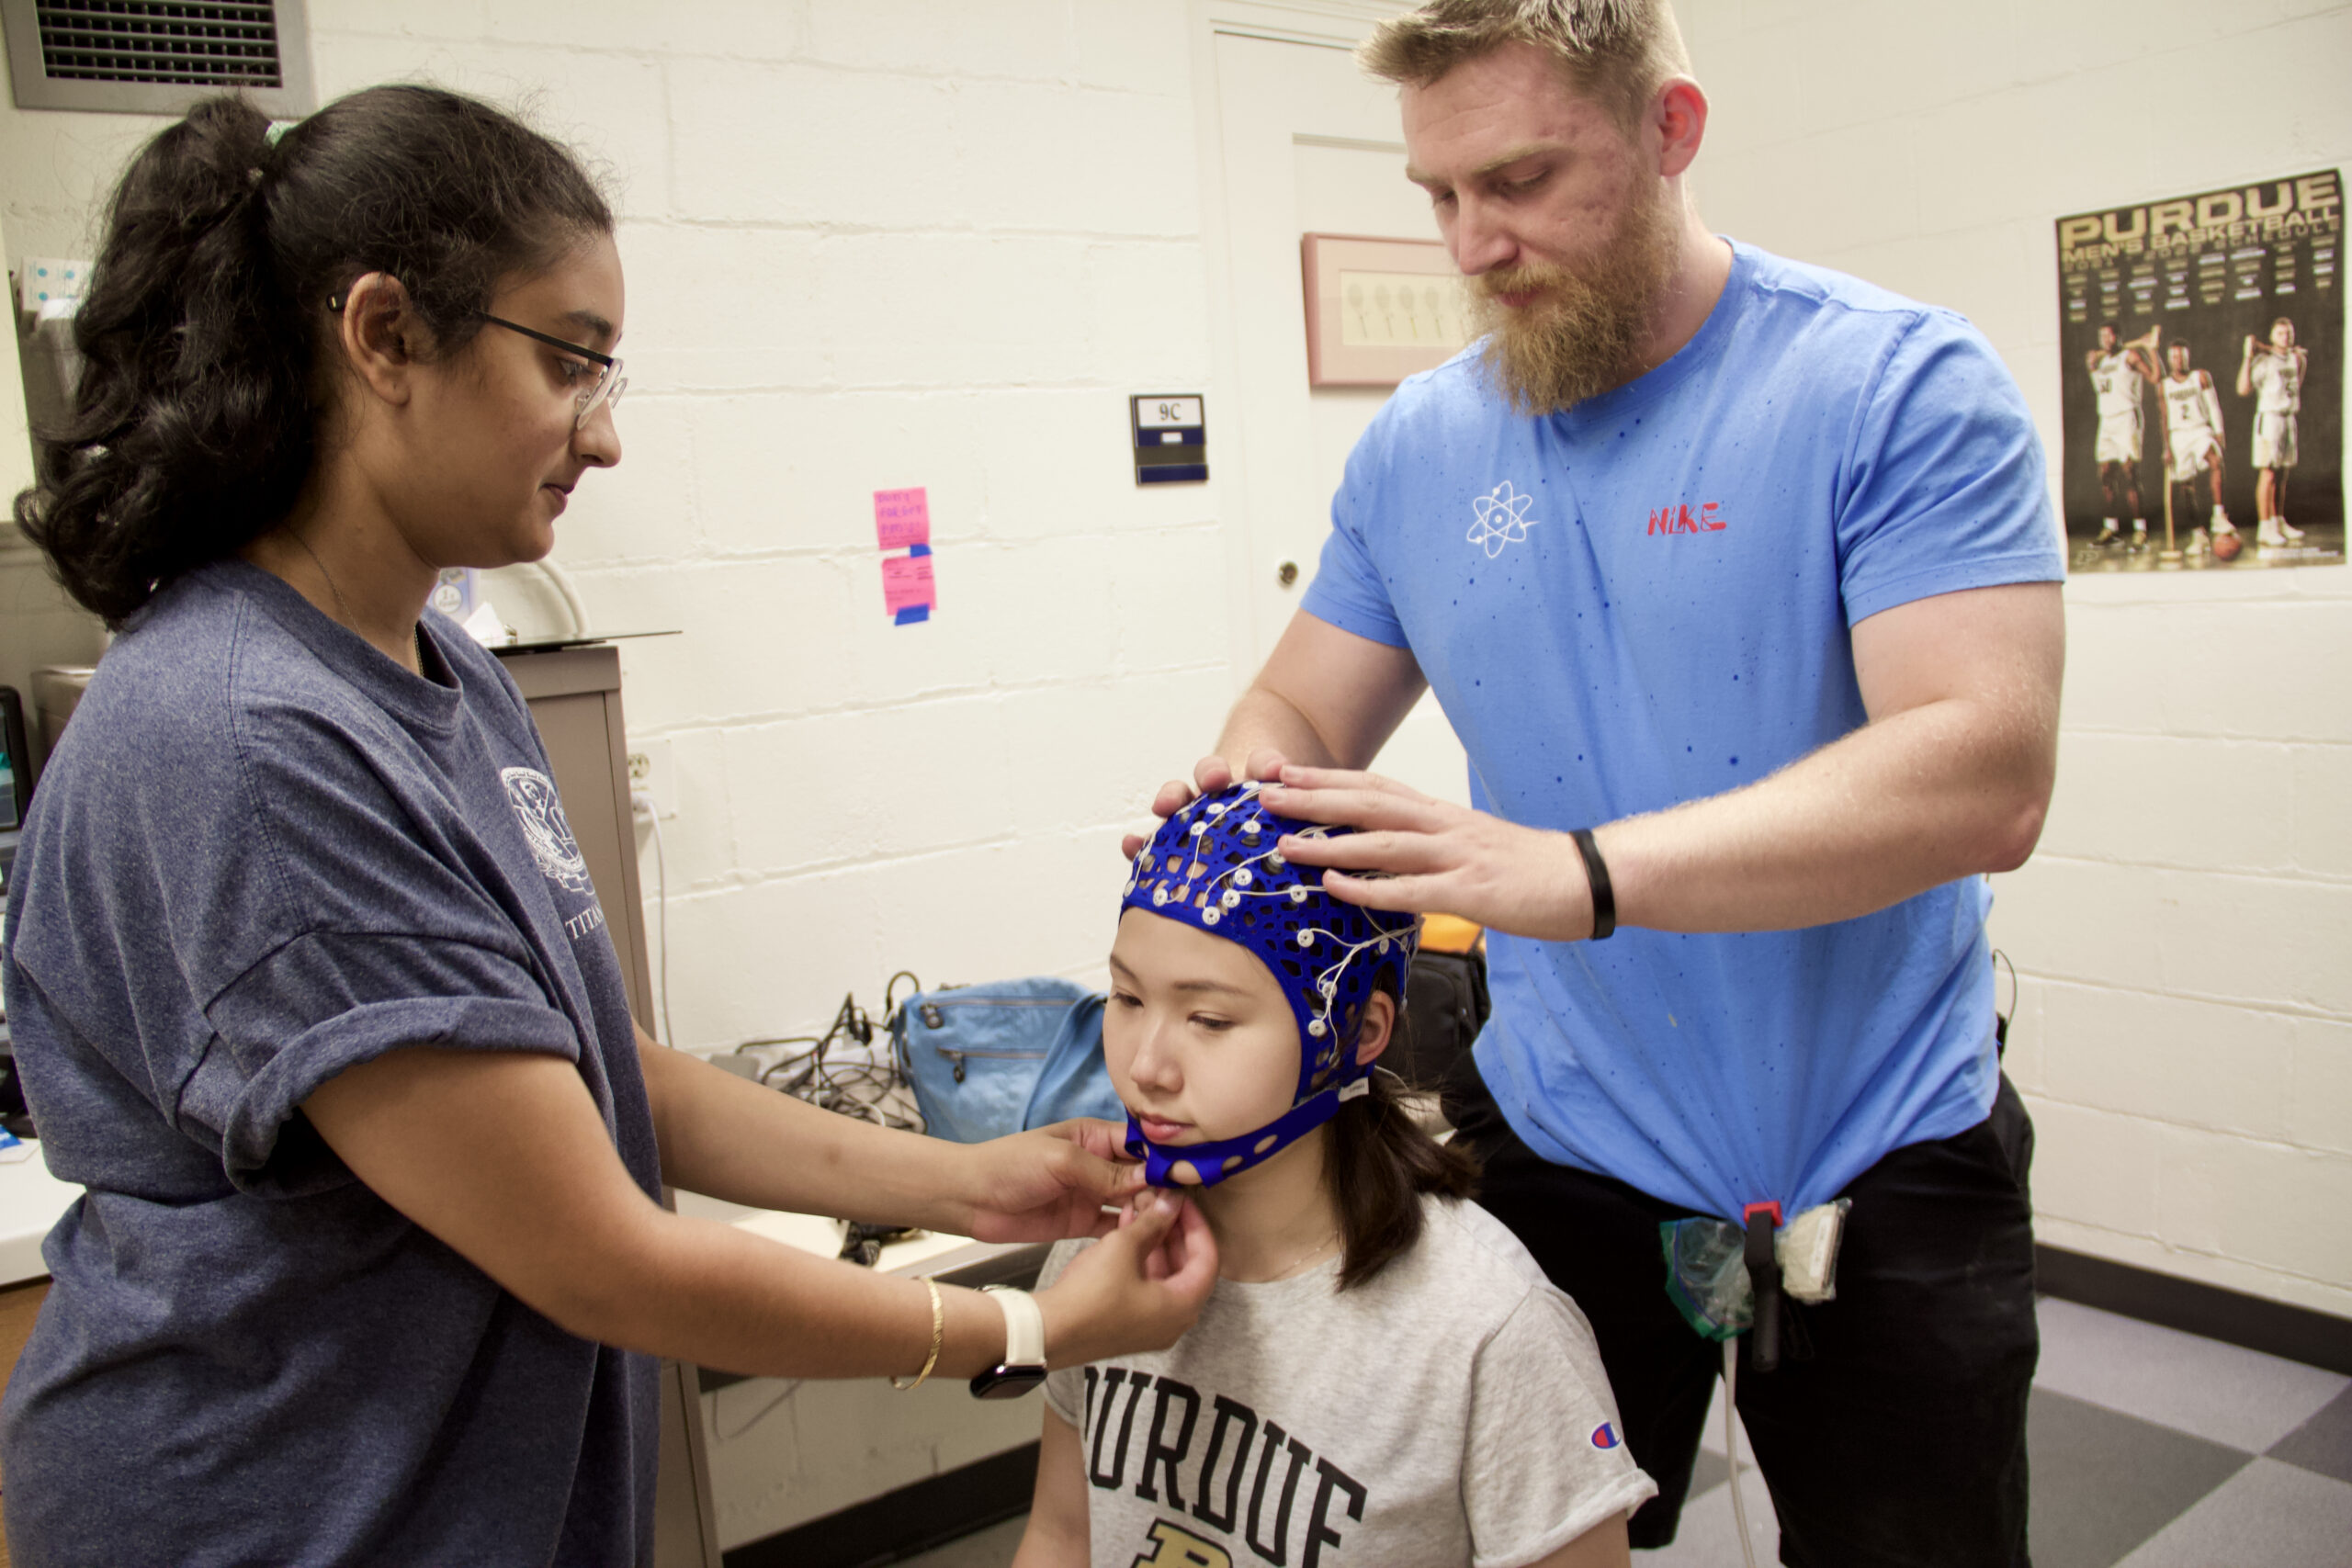 Rida Khatri and Nick Baumgartner stand to fit an EEG cap to Amber Yu, who is seated.